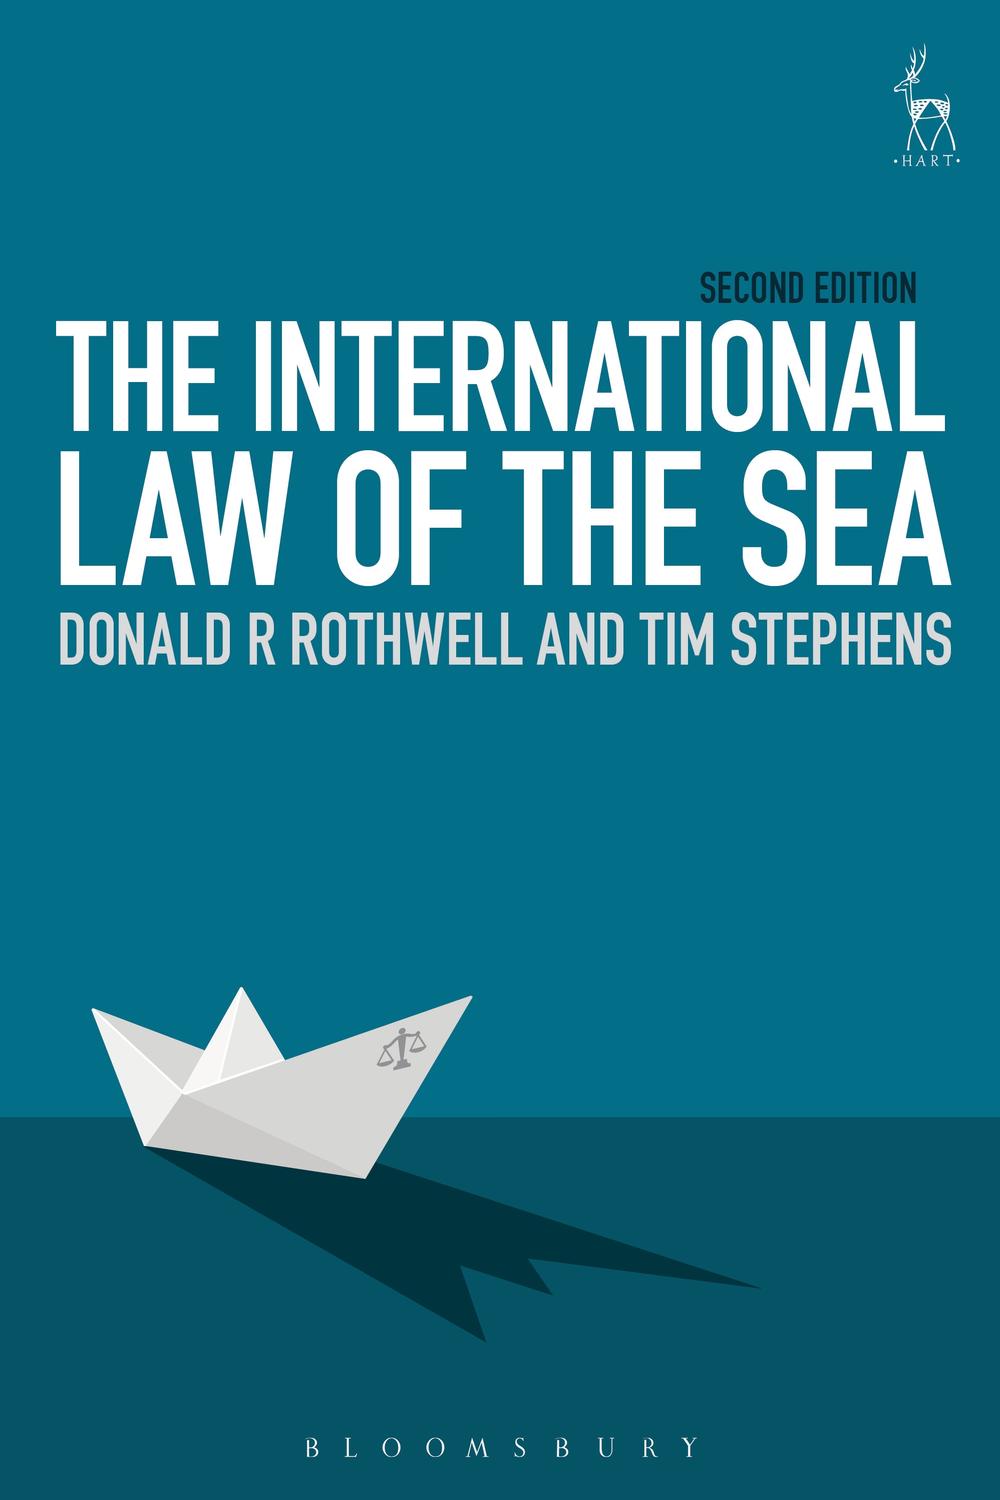 The International Law of the Sea - Donald R. Rothwell, Tim Stephens,,